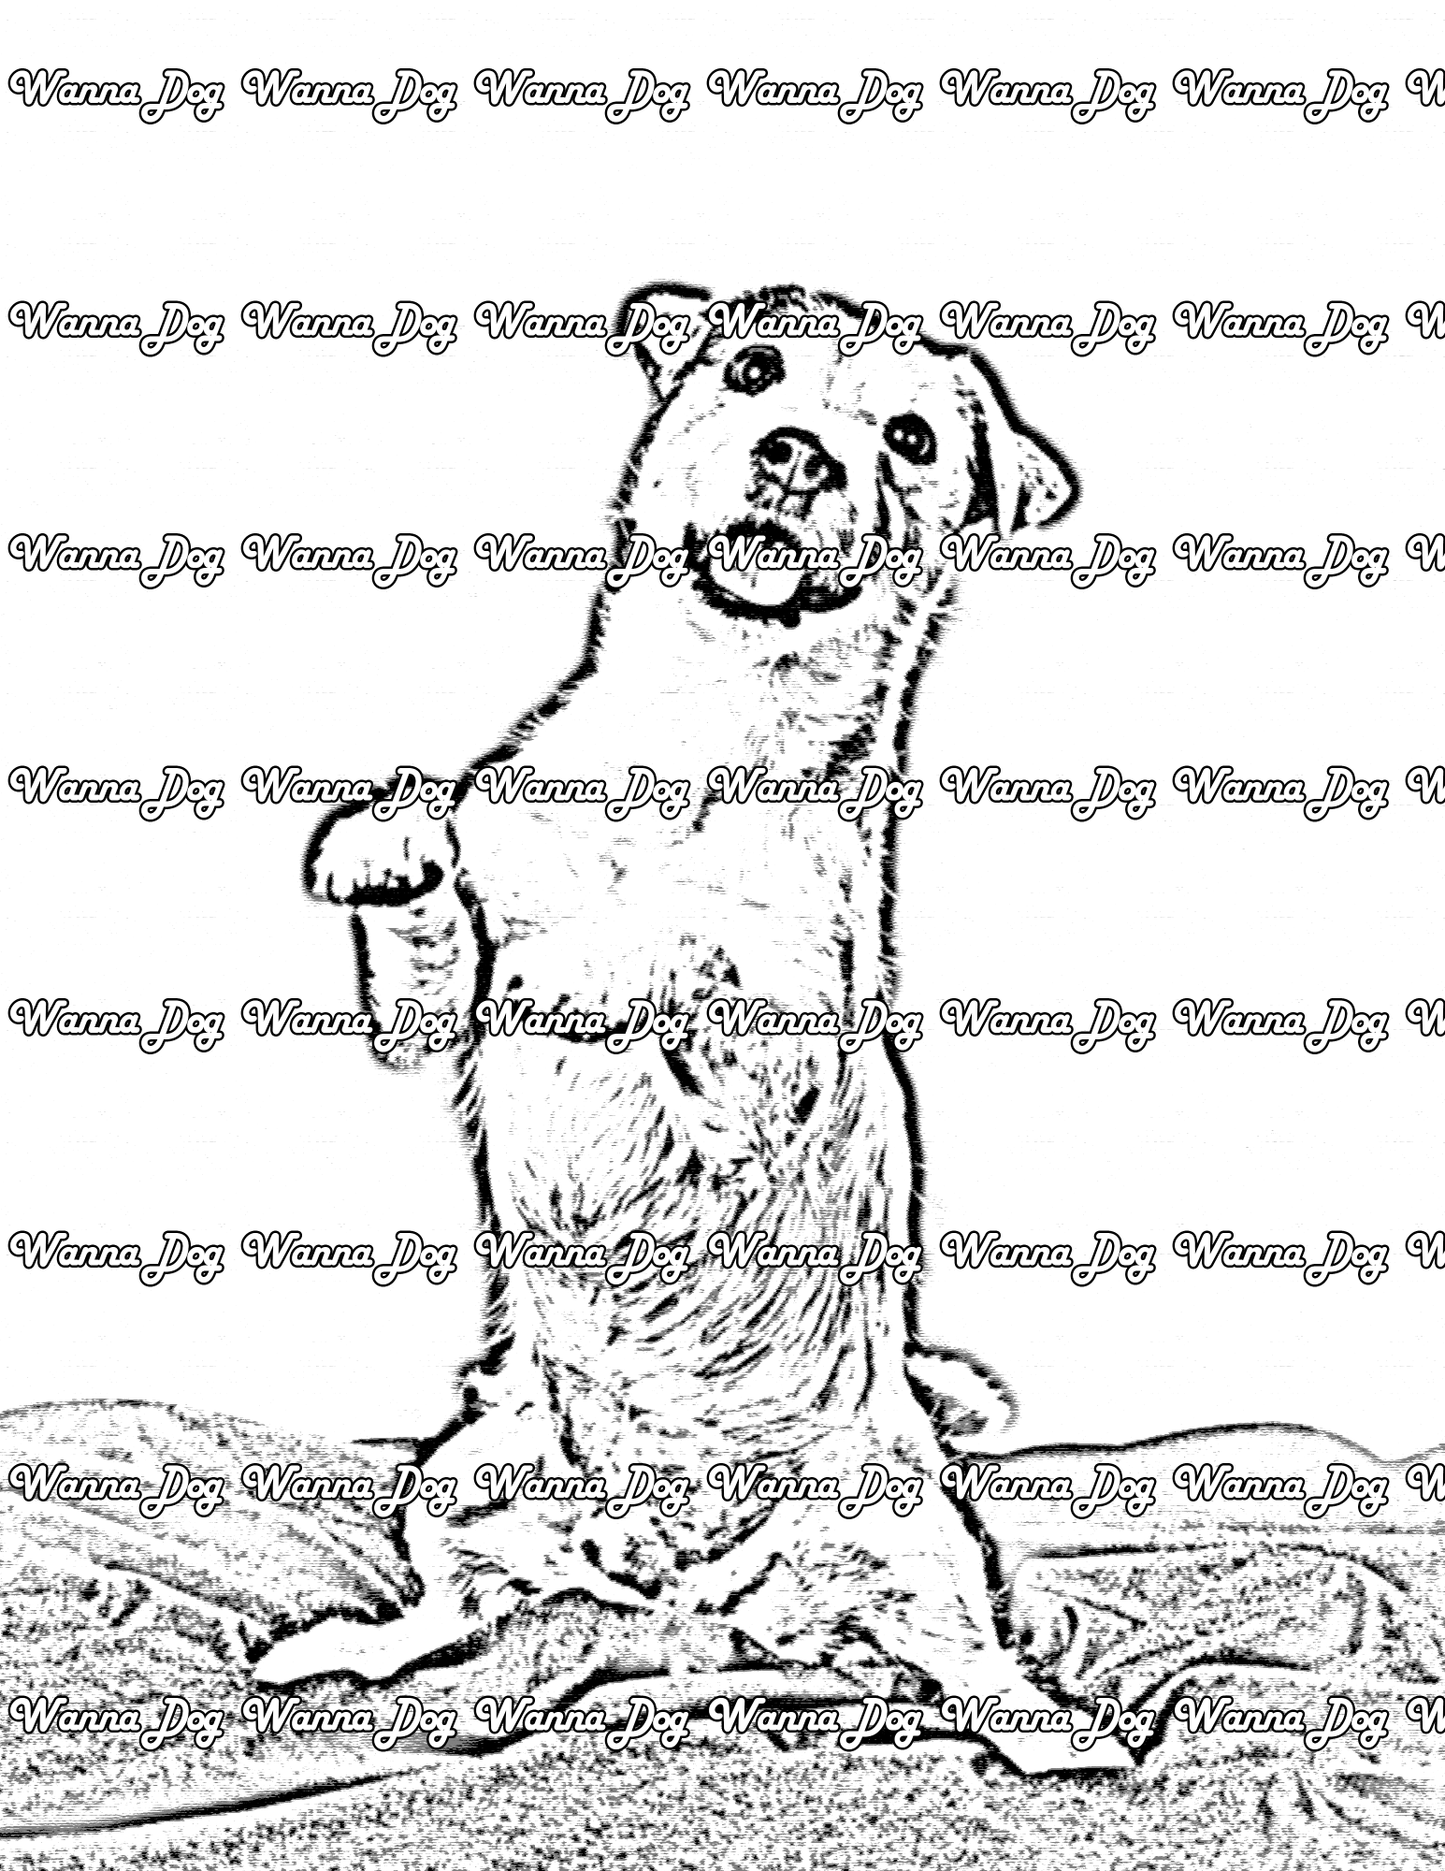 Jack Russell Terrier Coloring Page of a Jack Russell Terrier standing on two feet